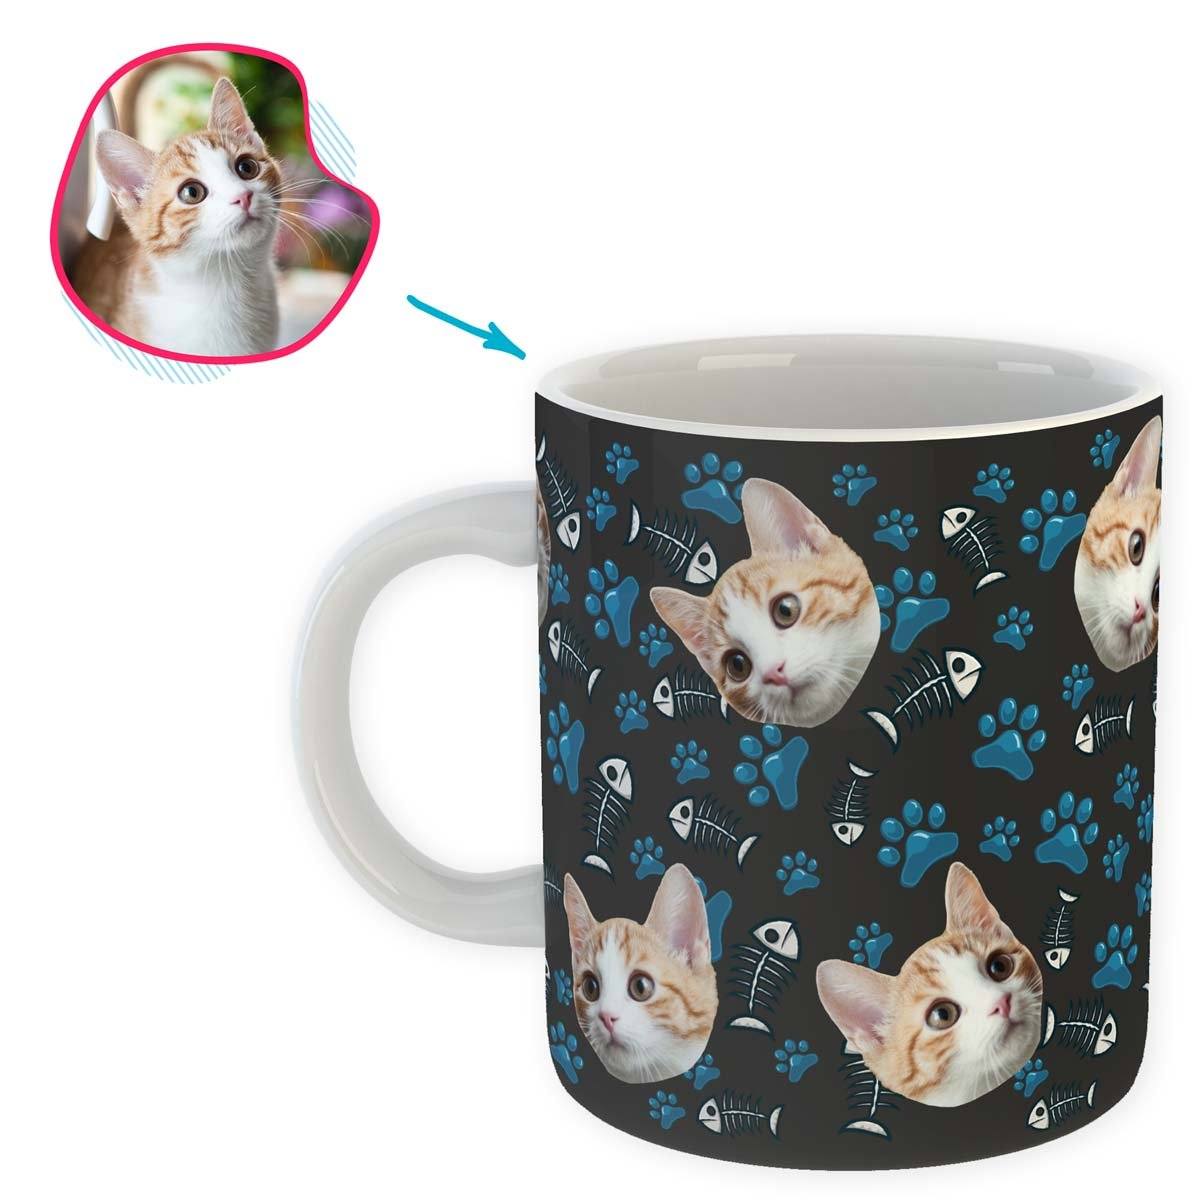 dark Cat mug personalized with photo of face printed on it